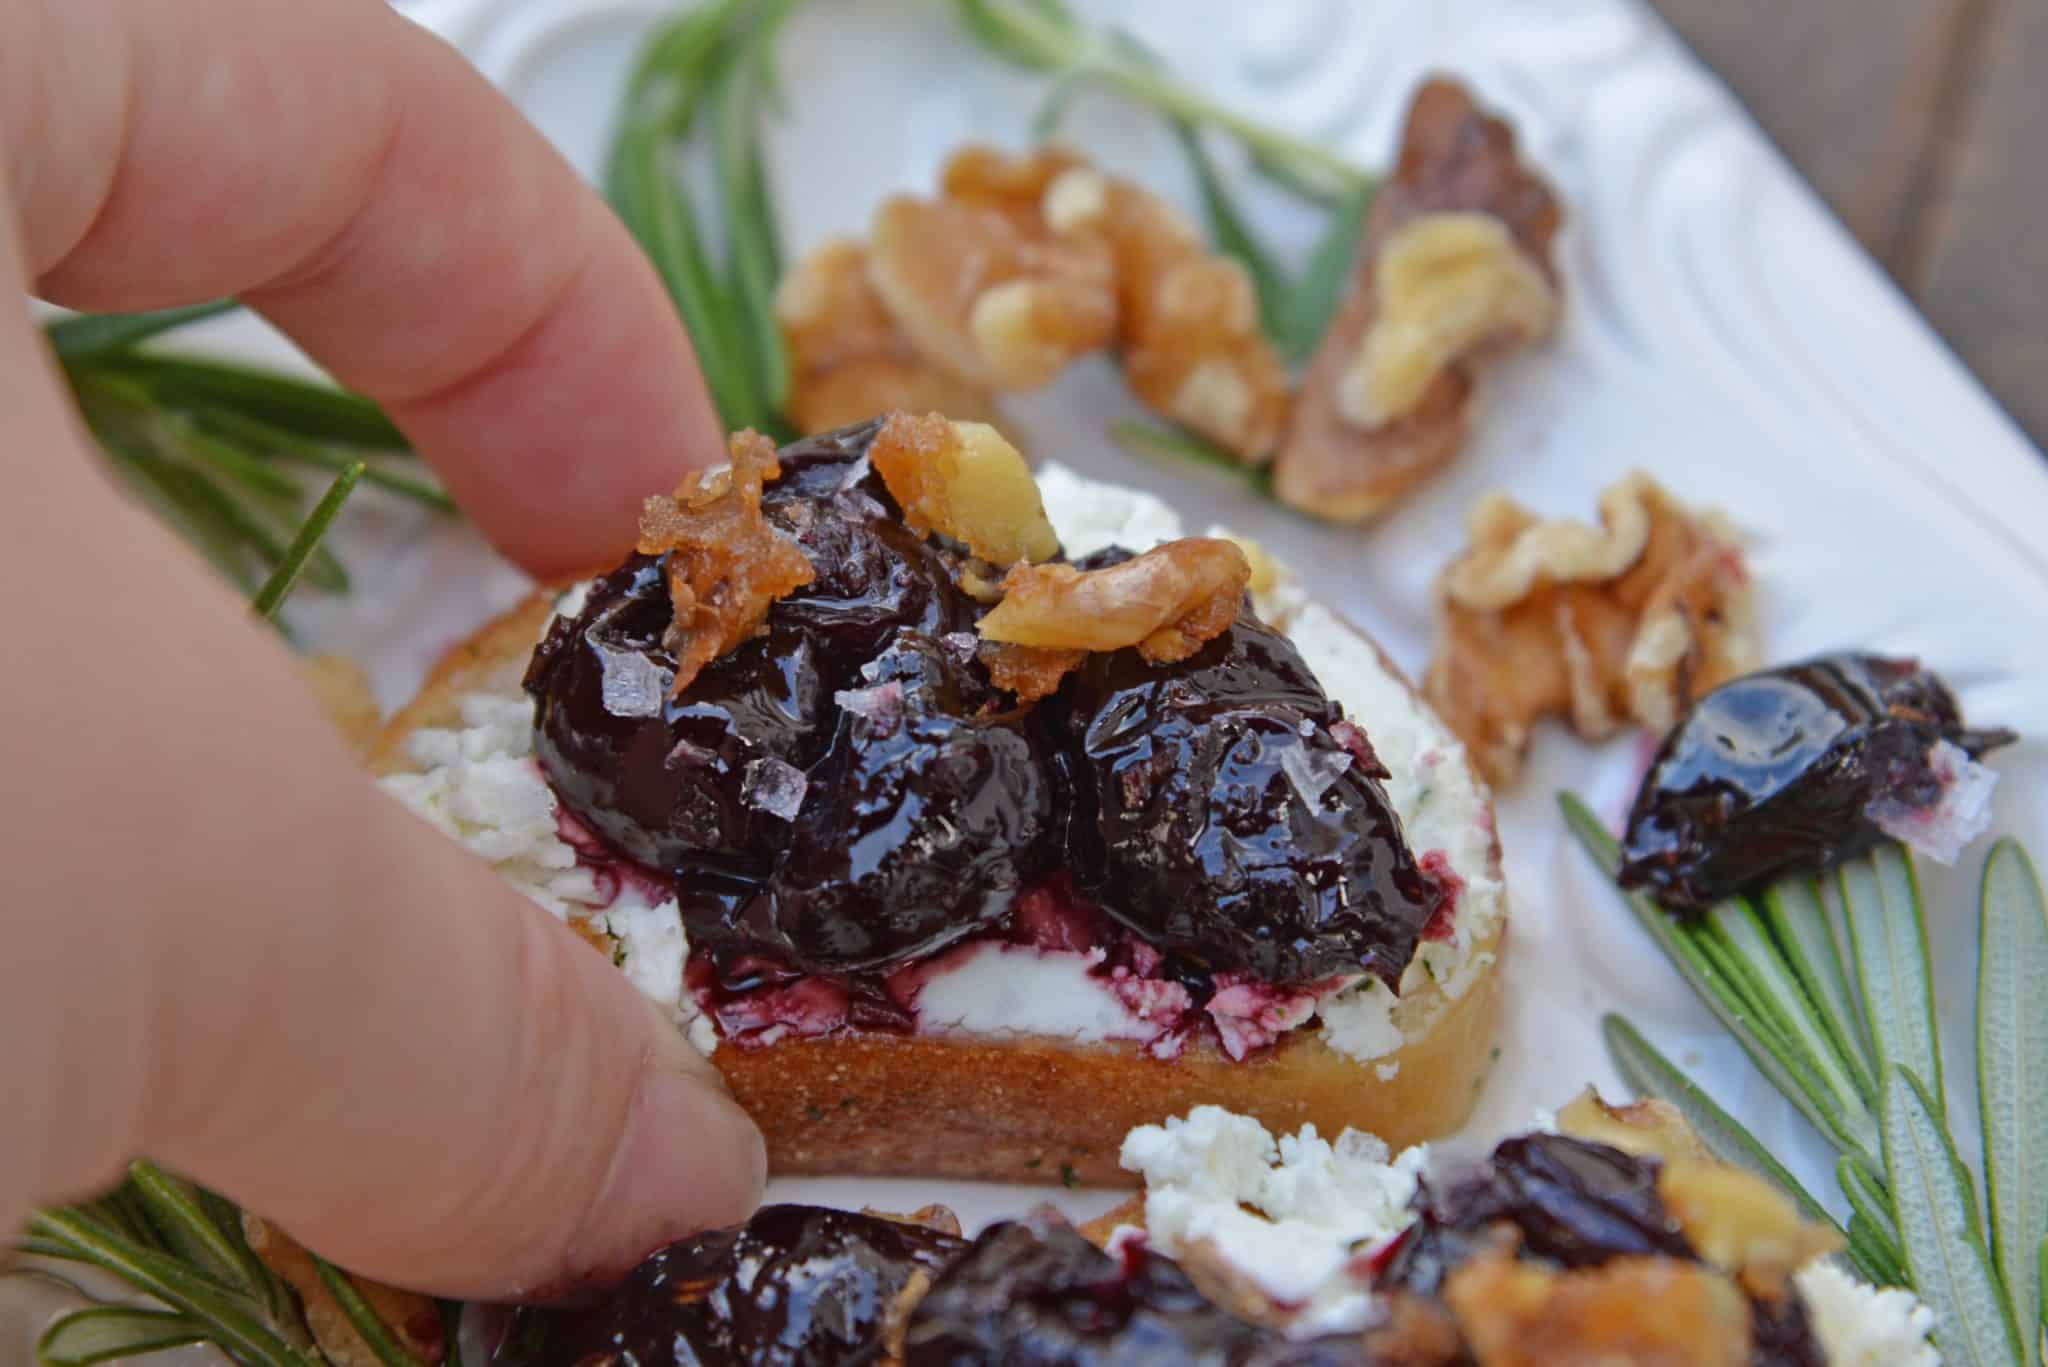 Balsamic Cherry Crostini is an easy appetizer using goat cheese and a tangy cherry balsamic reduction. The perfect holiday appetizer recipe! #crostinirecipes #easyappetizerrecipes www.savoryexperiments.com